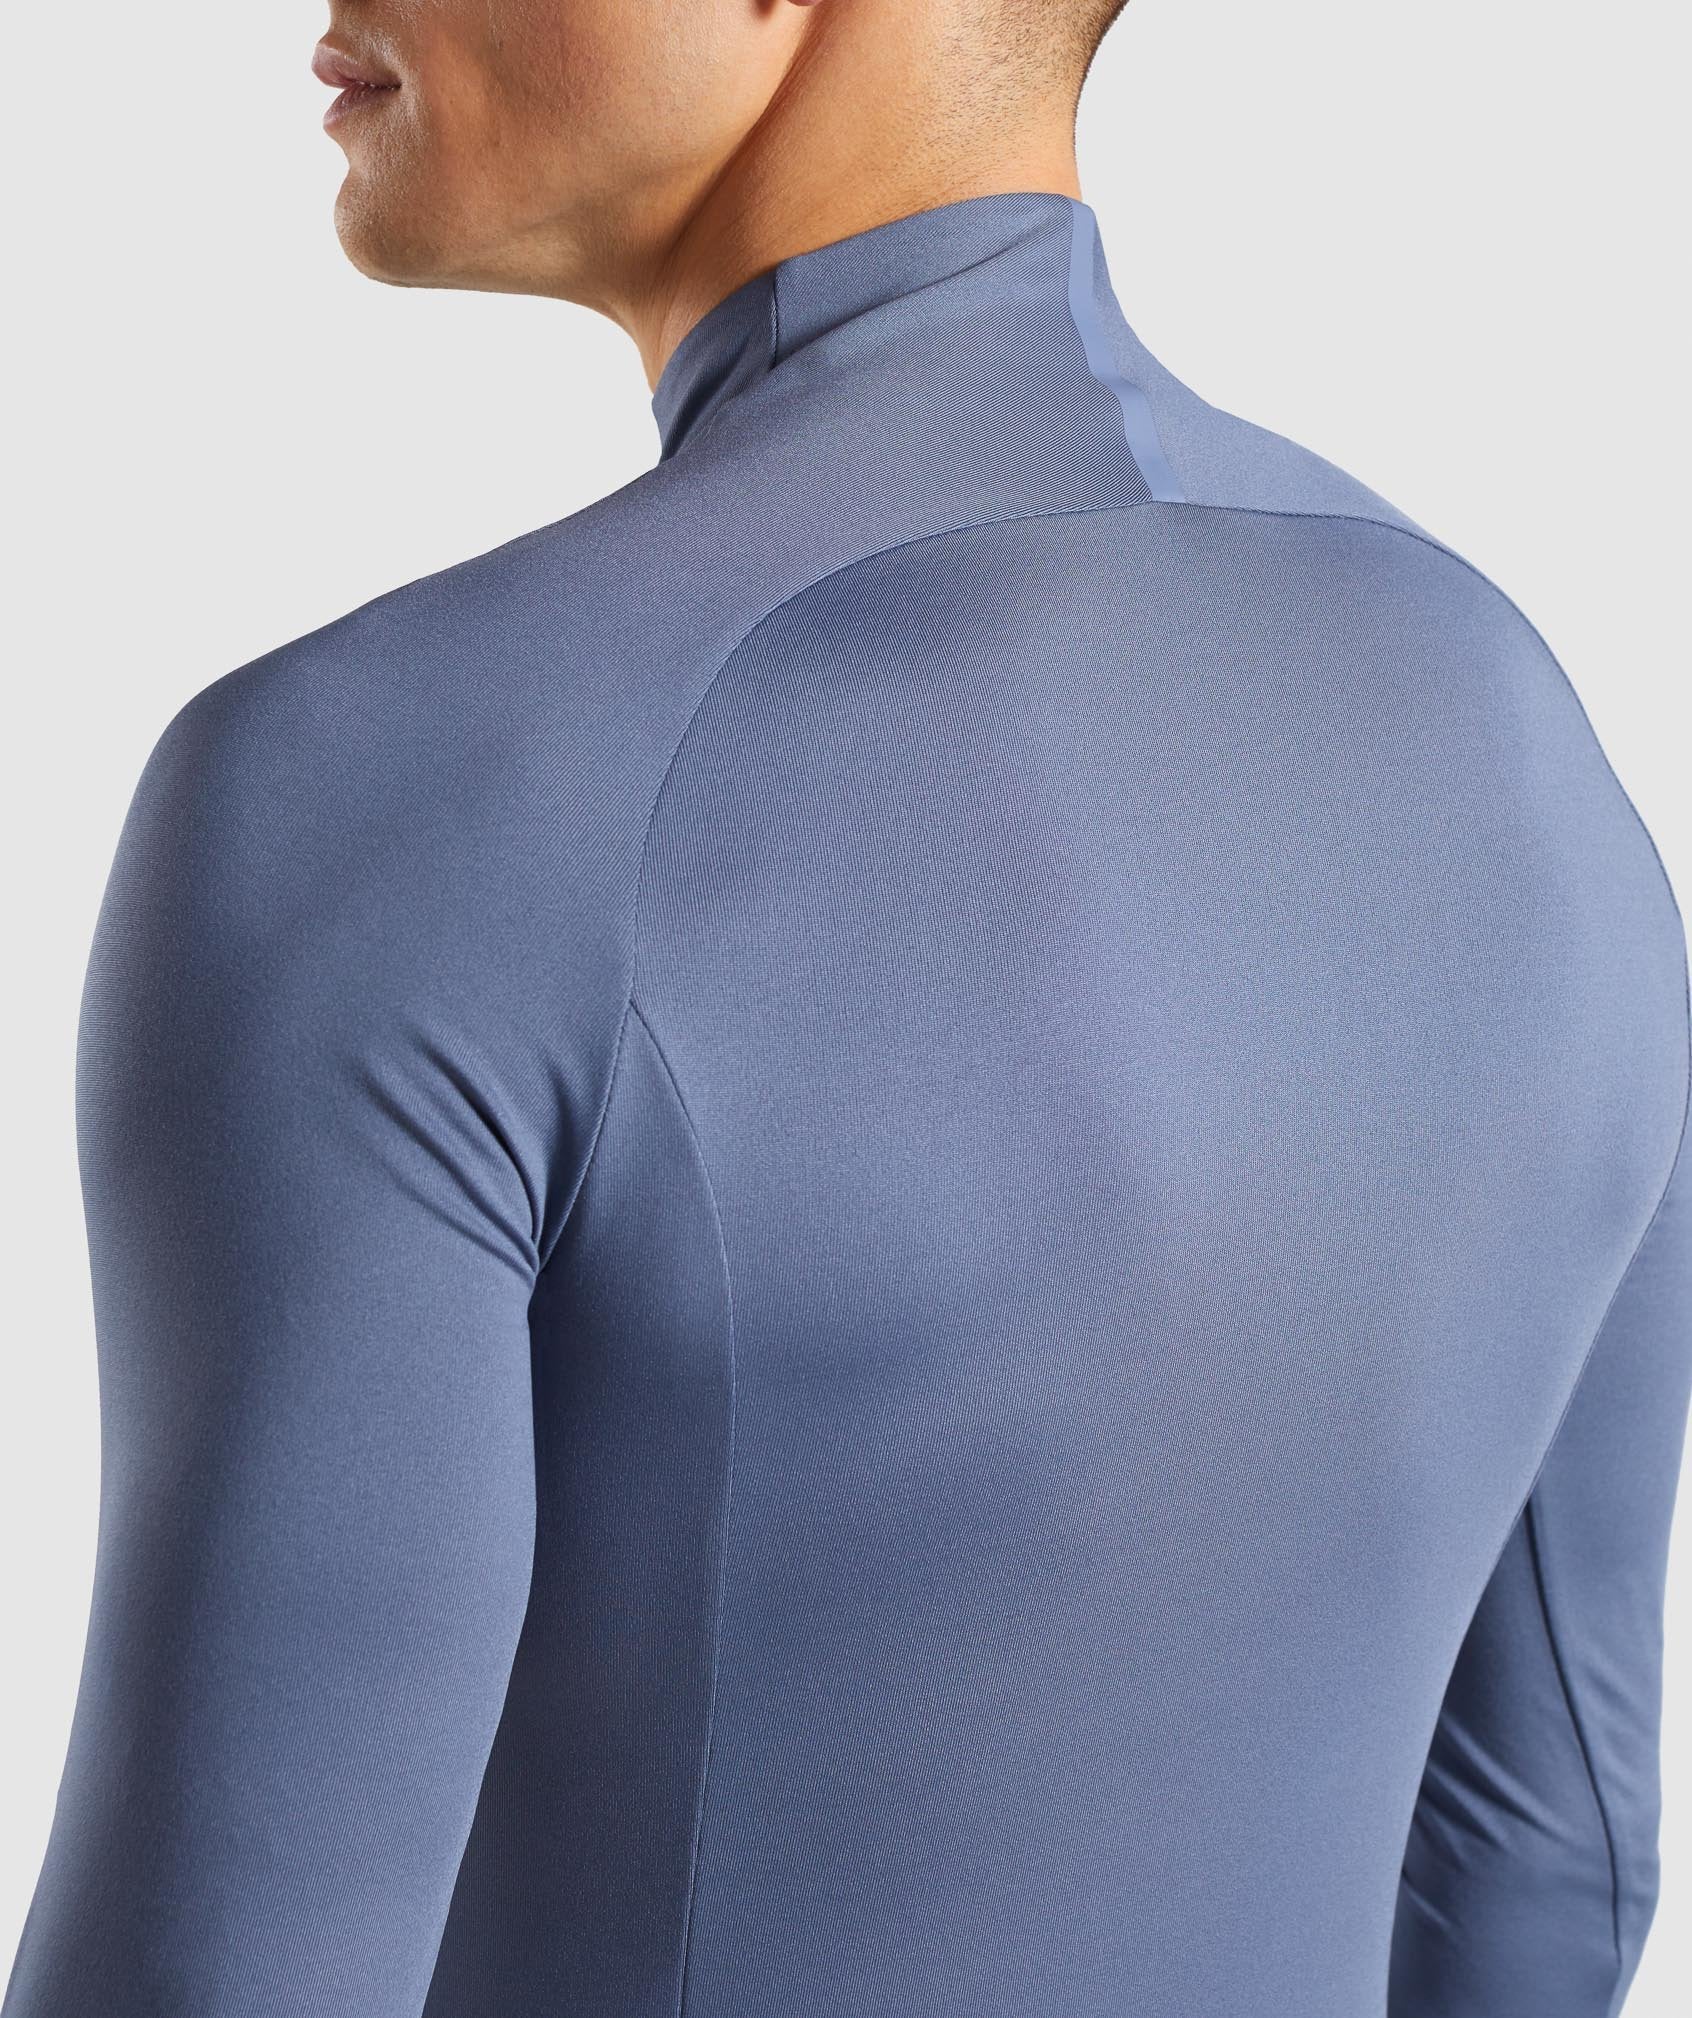 Advanced 1/4 Zip Pullover in Aegean Blue - view 6